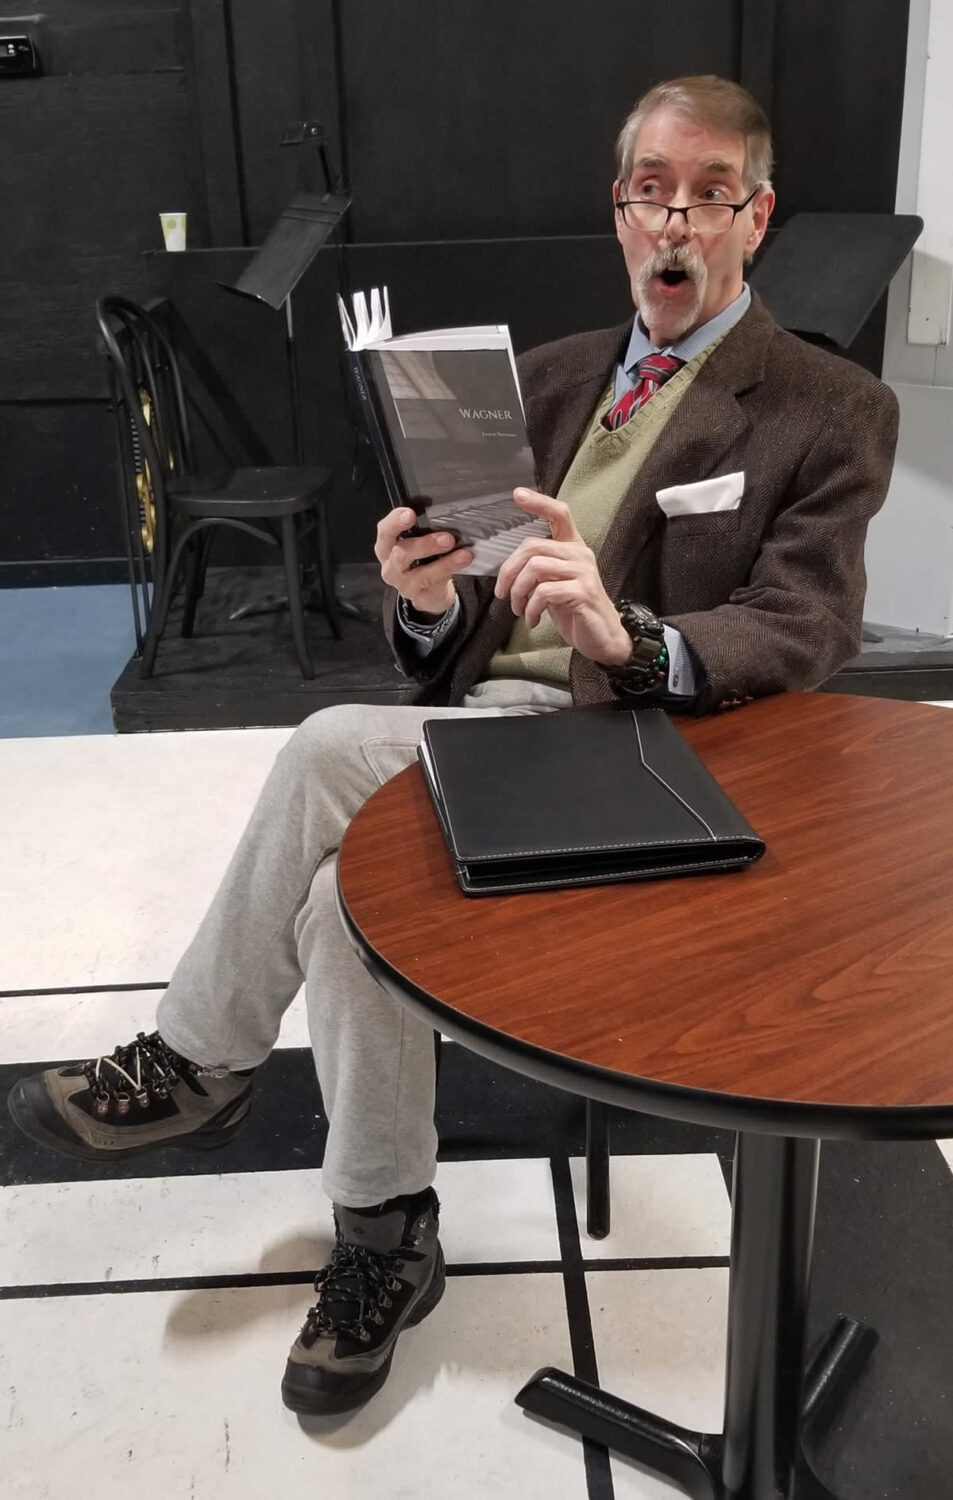 Reggie (Mike Cabsinger) realizes “Newmann was right!” while reading. The comedy Quartet runs at The Drama Group from April 12 to 21.